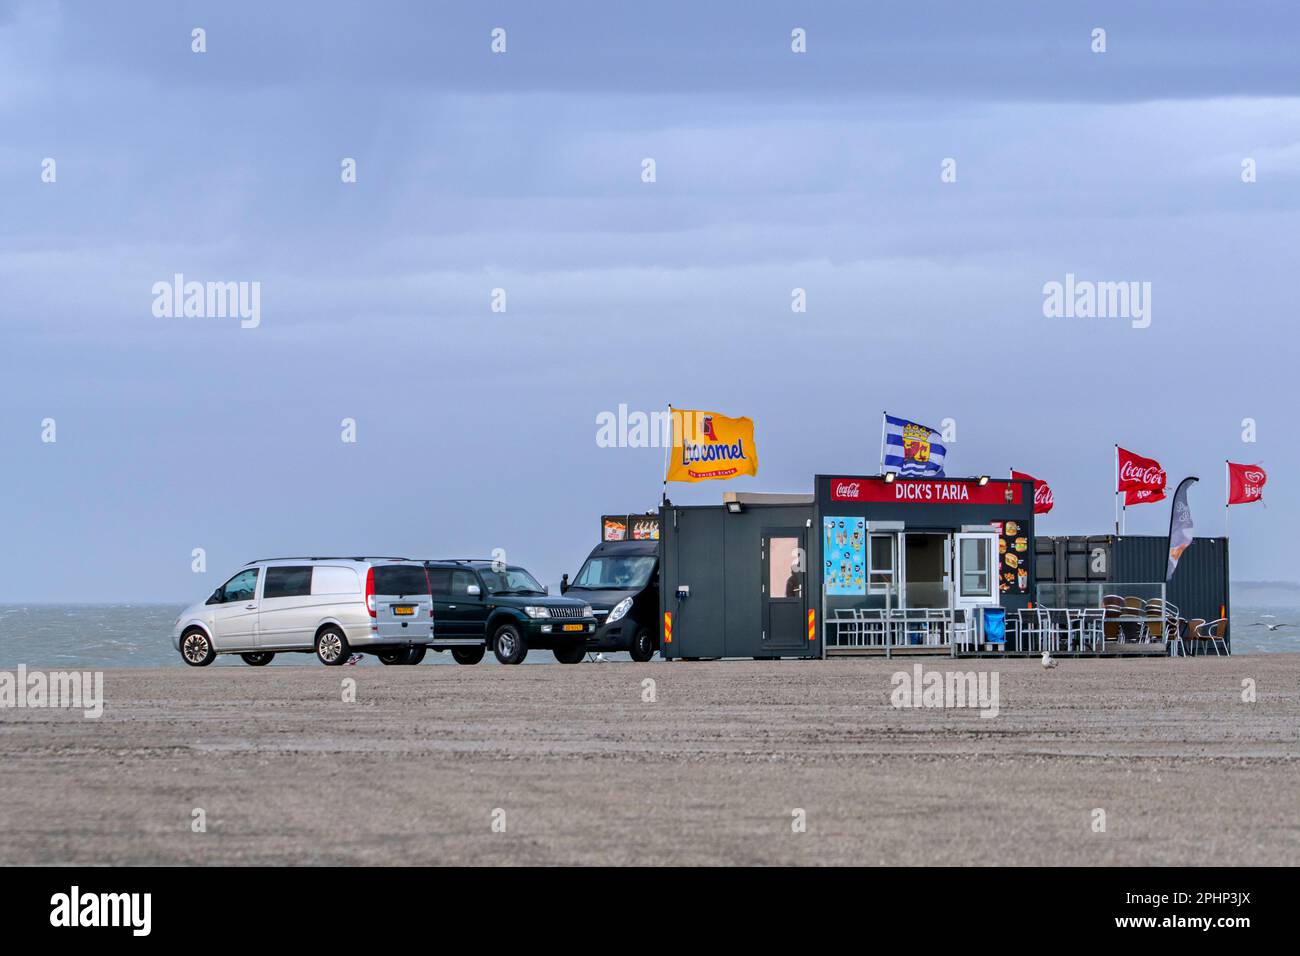 Dick's Taria fast food restaurant on a stormy day along the North Sea coast at the Brouwersdam, Ellemeet, Zeeland, Netherlands Stock Photo